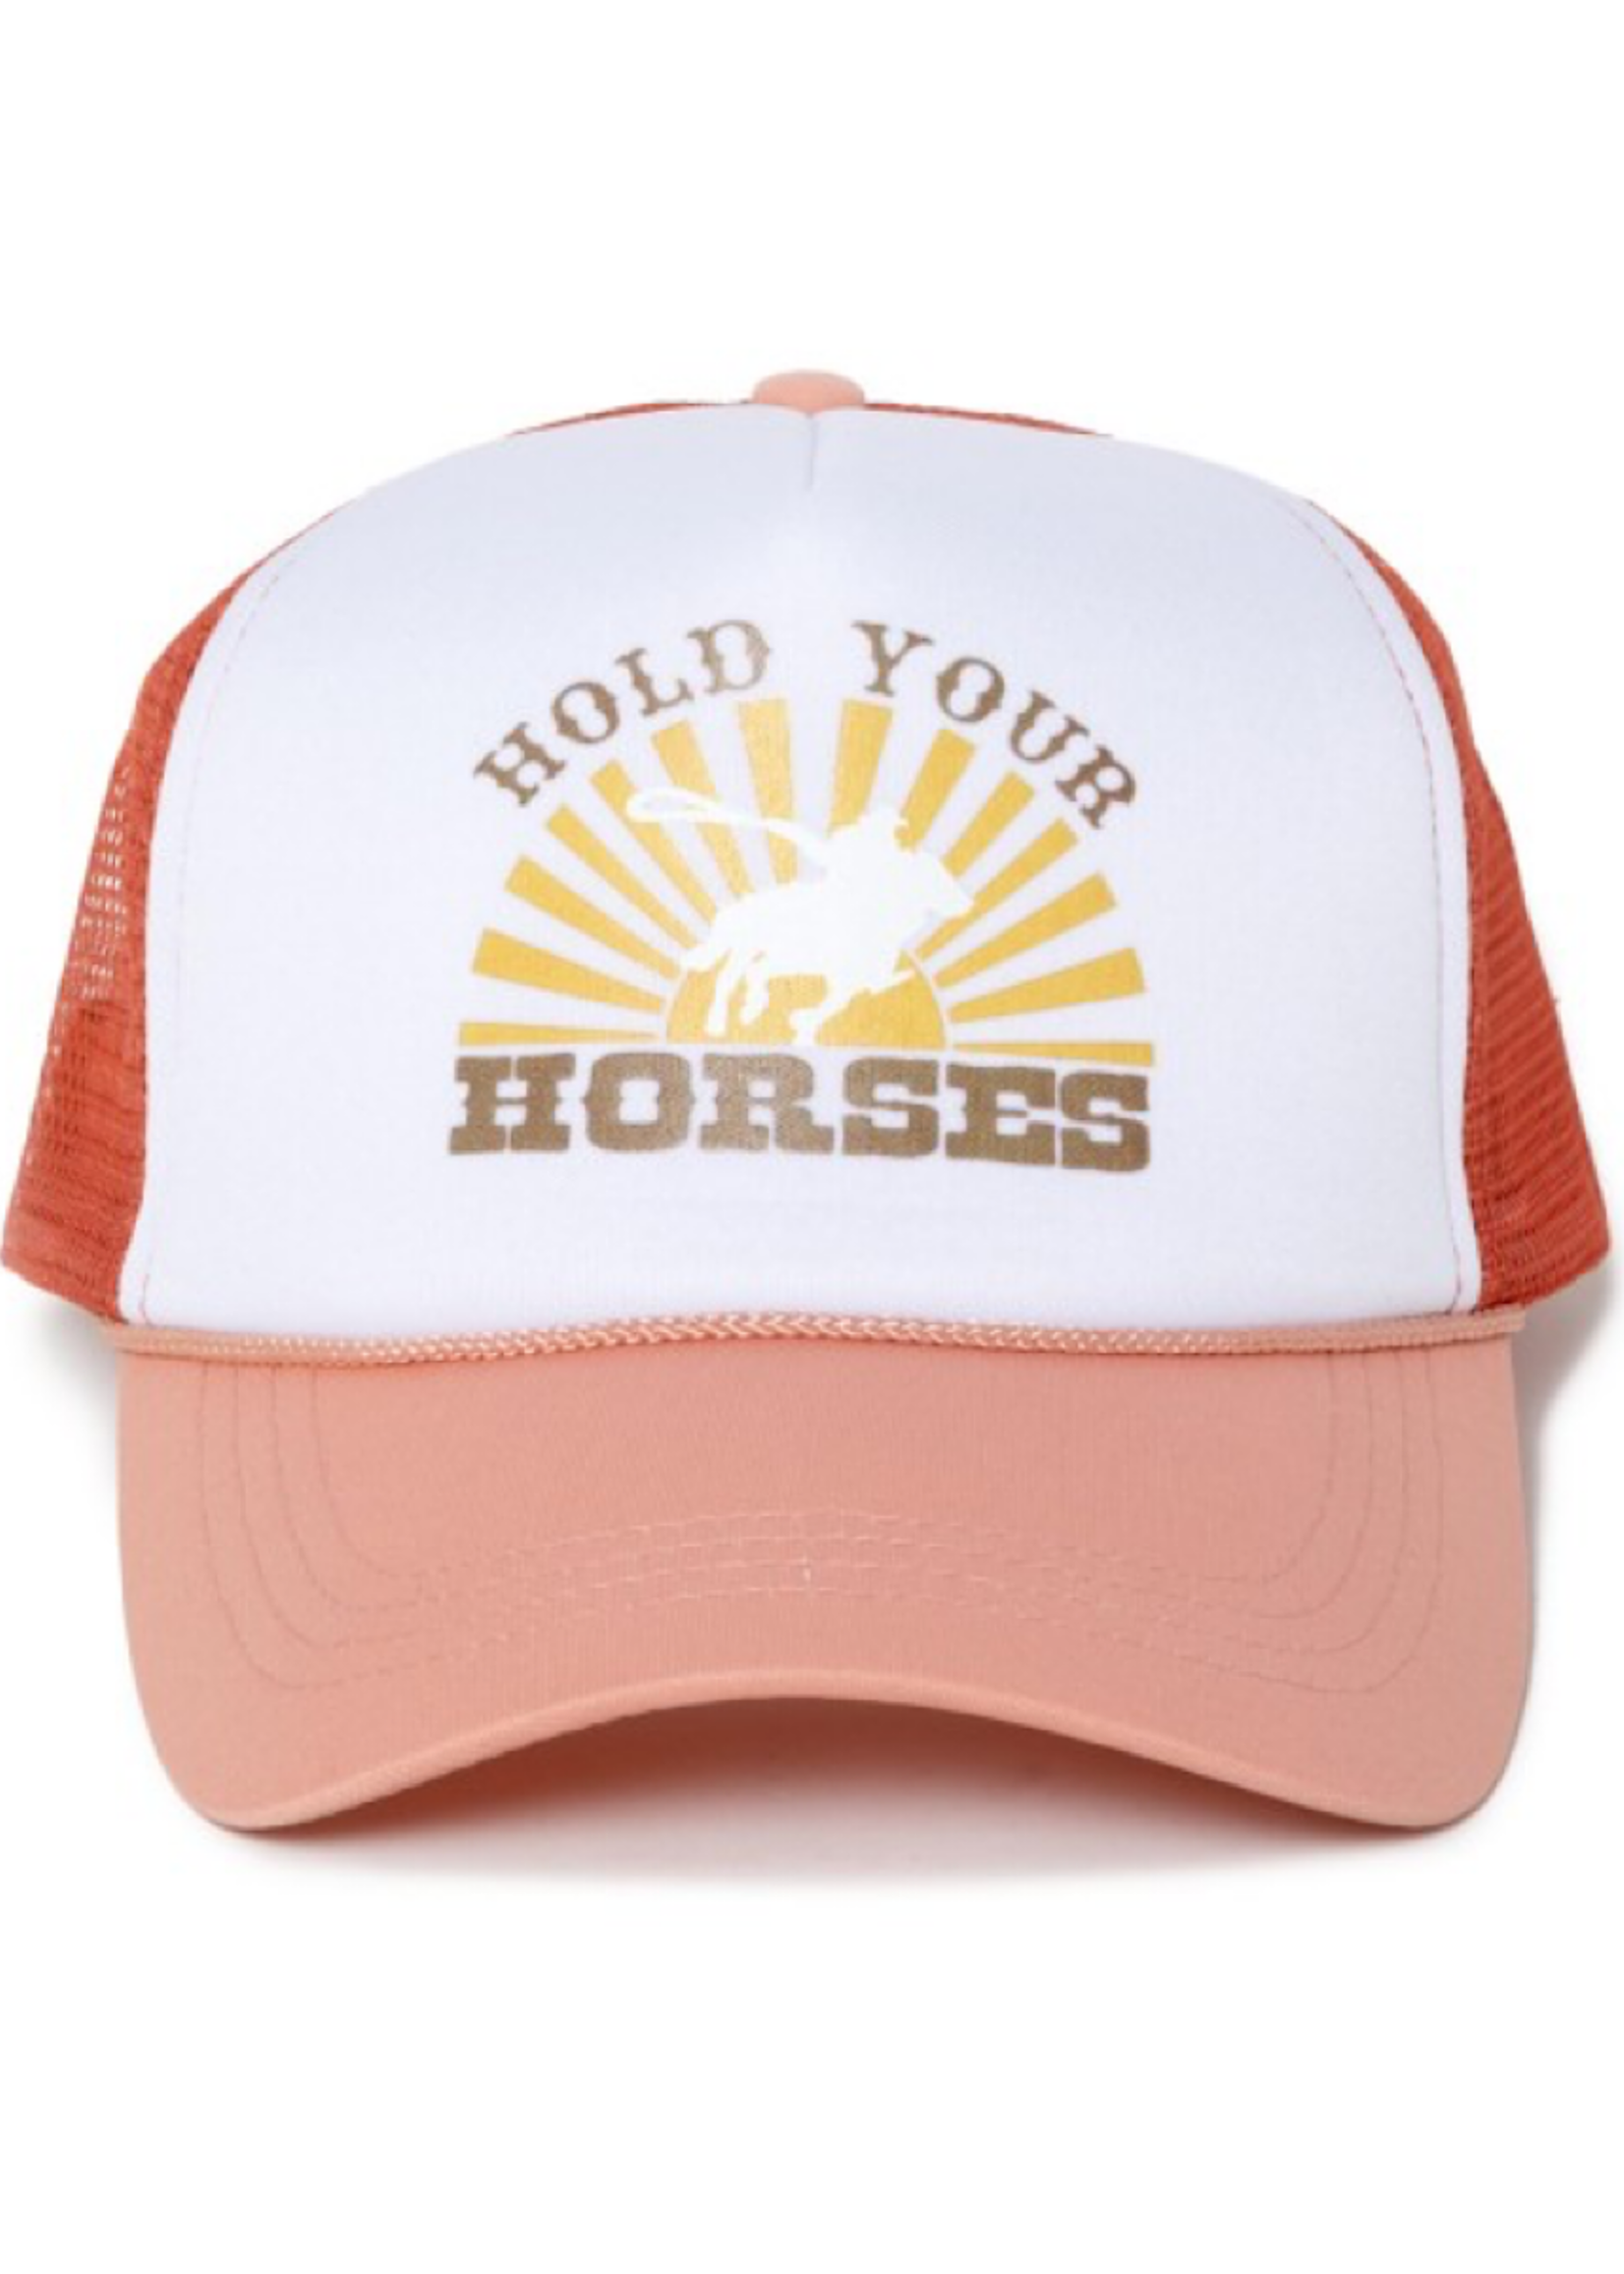 Hold Your Horses Rodeo Trucker Hat